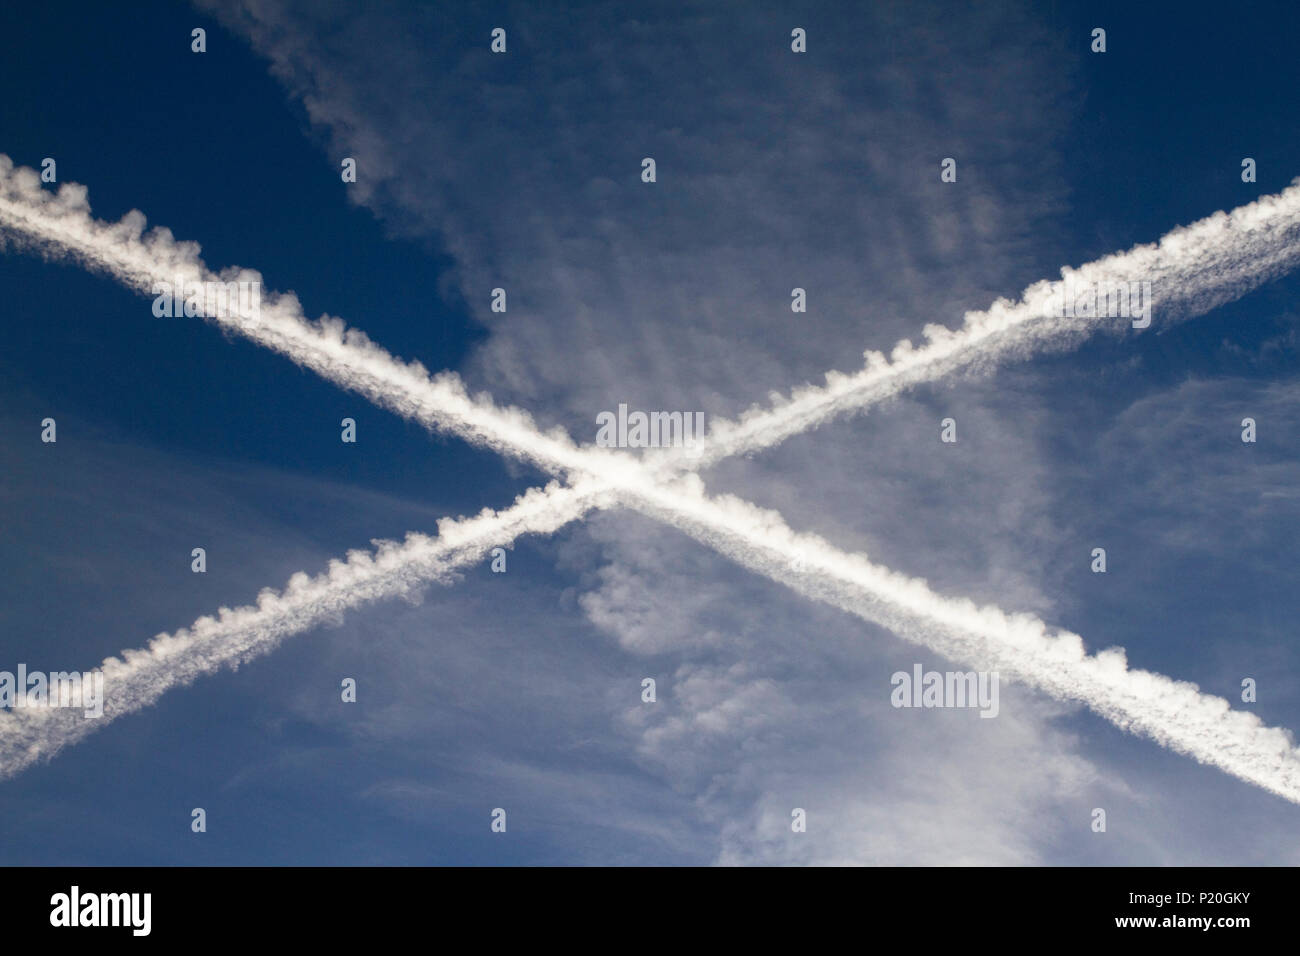 Flight paths of two aircrafts in the shape of a cross. Stock Photo